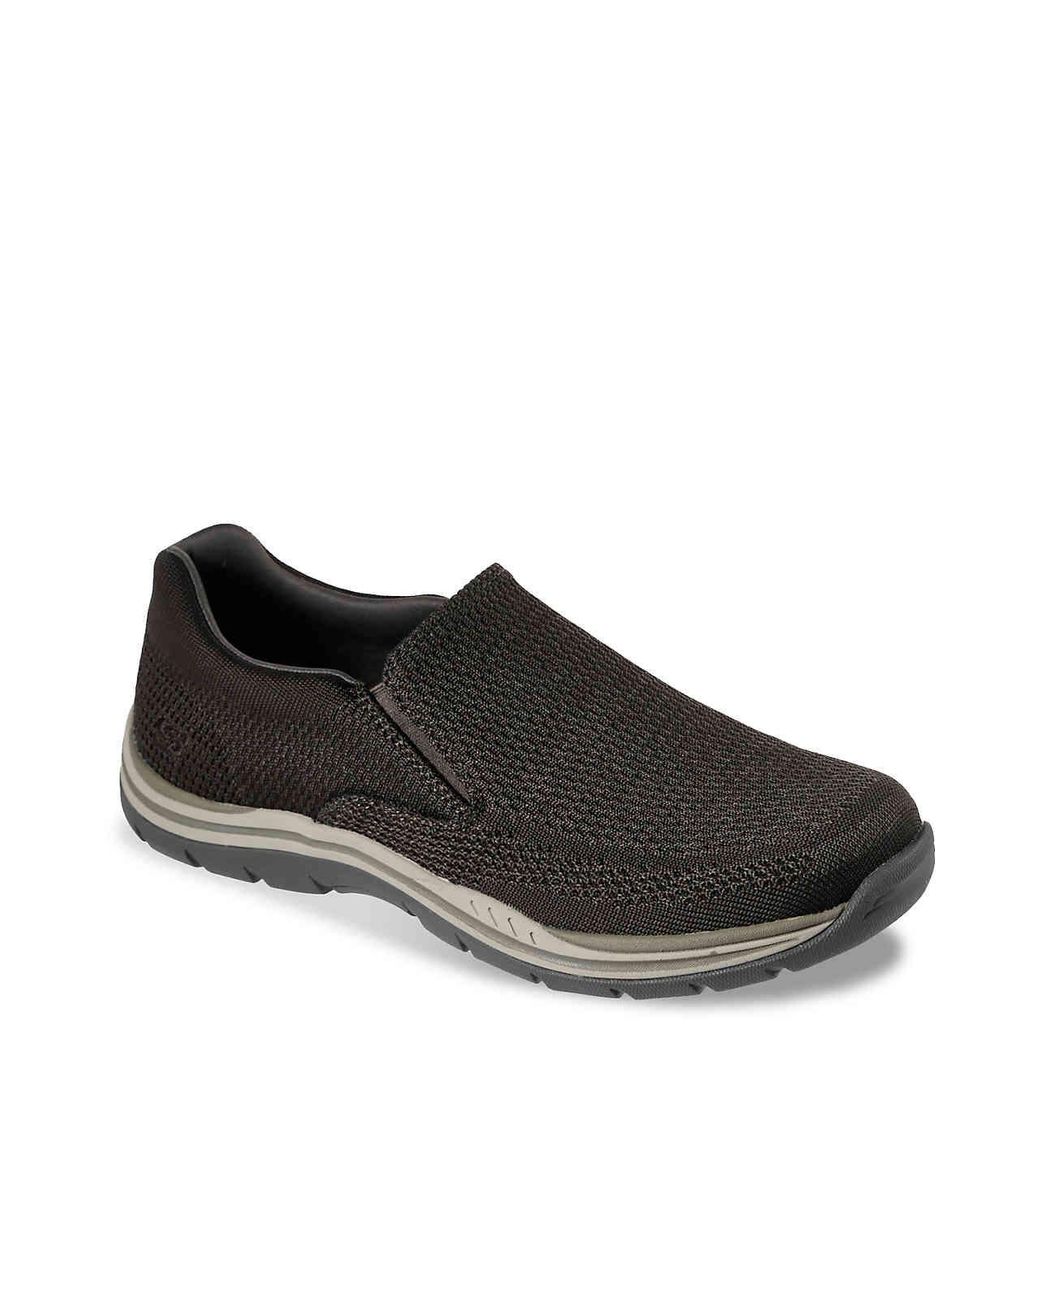 Skechers Canvas Relaxed Fit Expected Gomel Slip-on for Men - Lyst